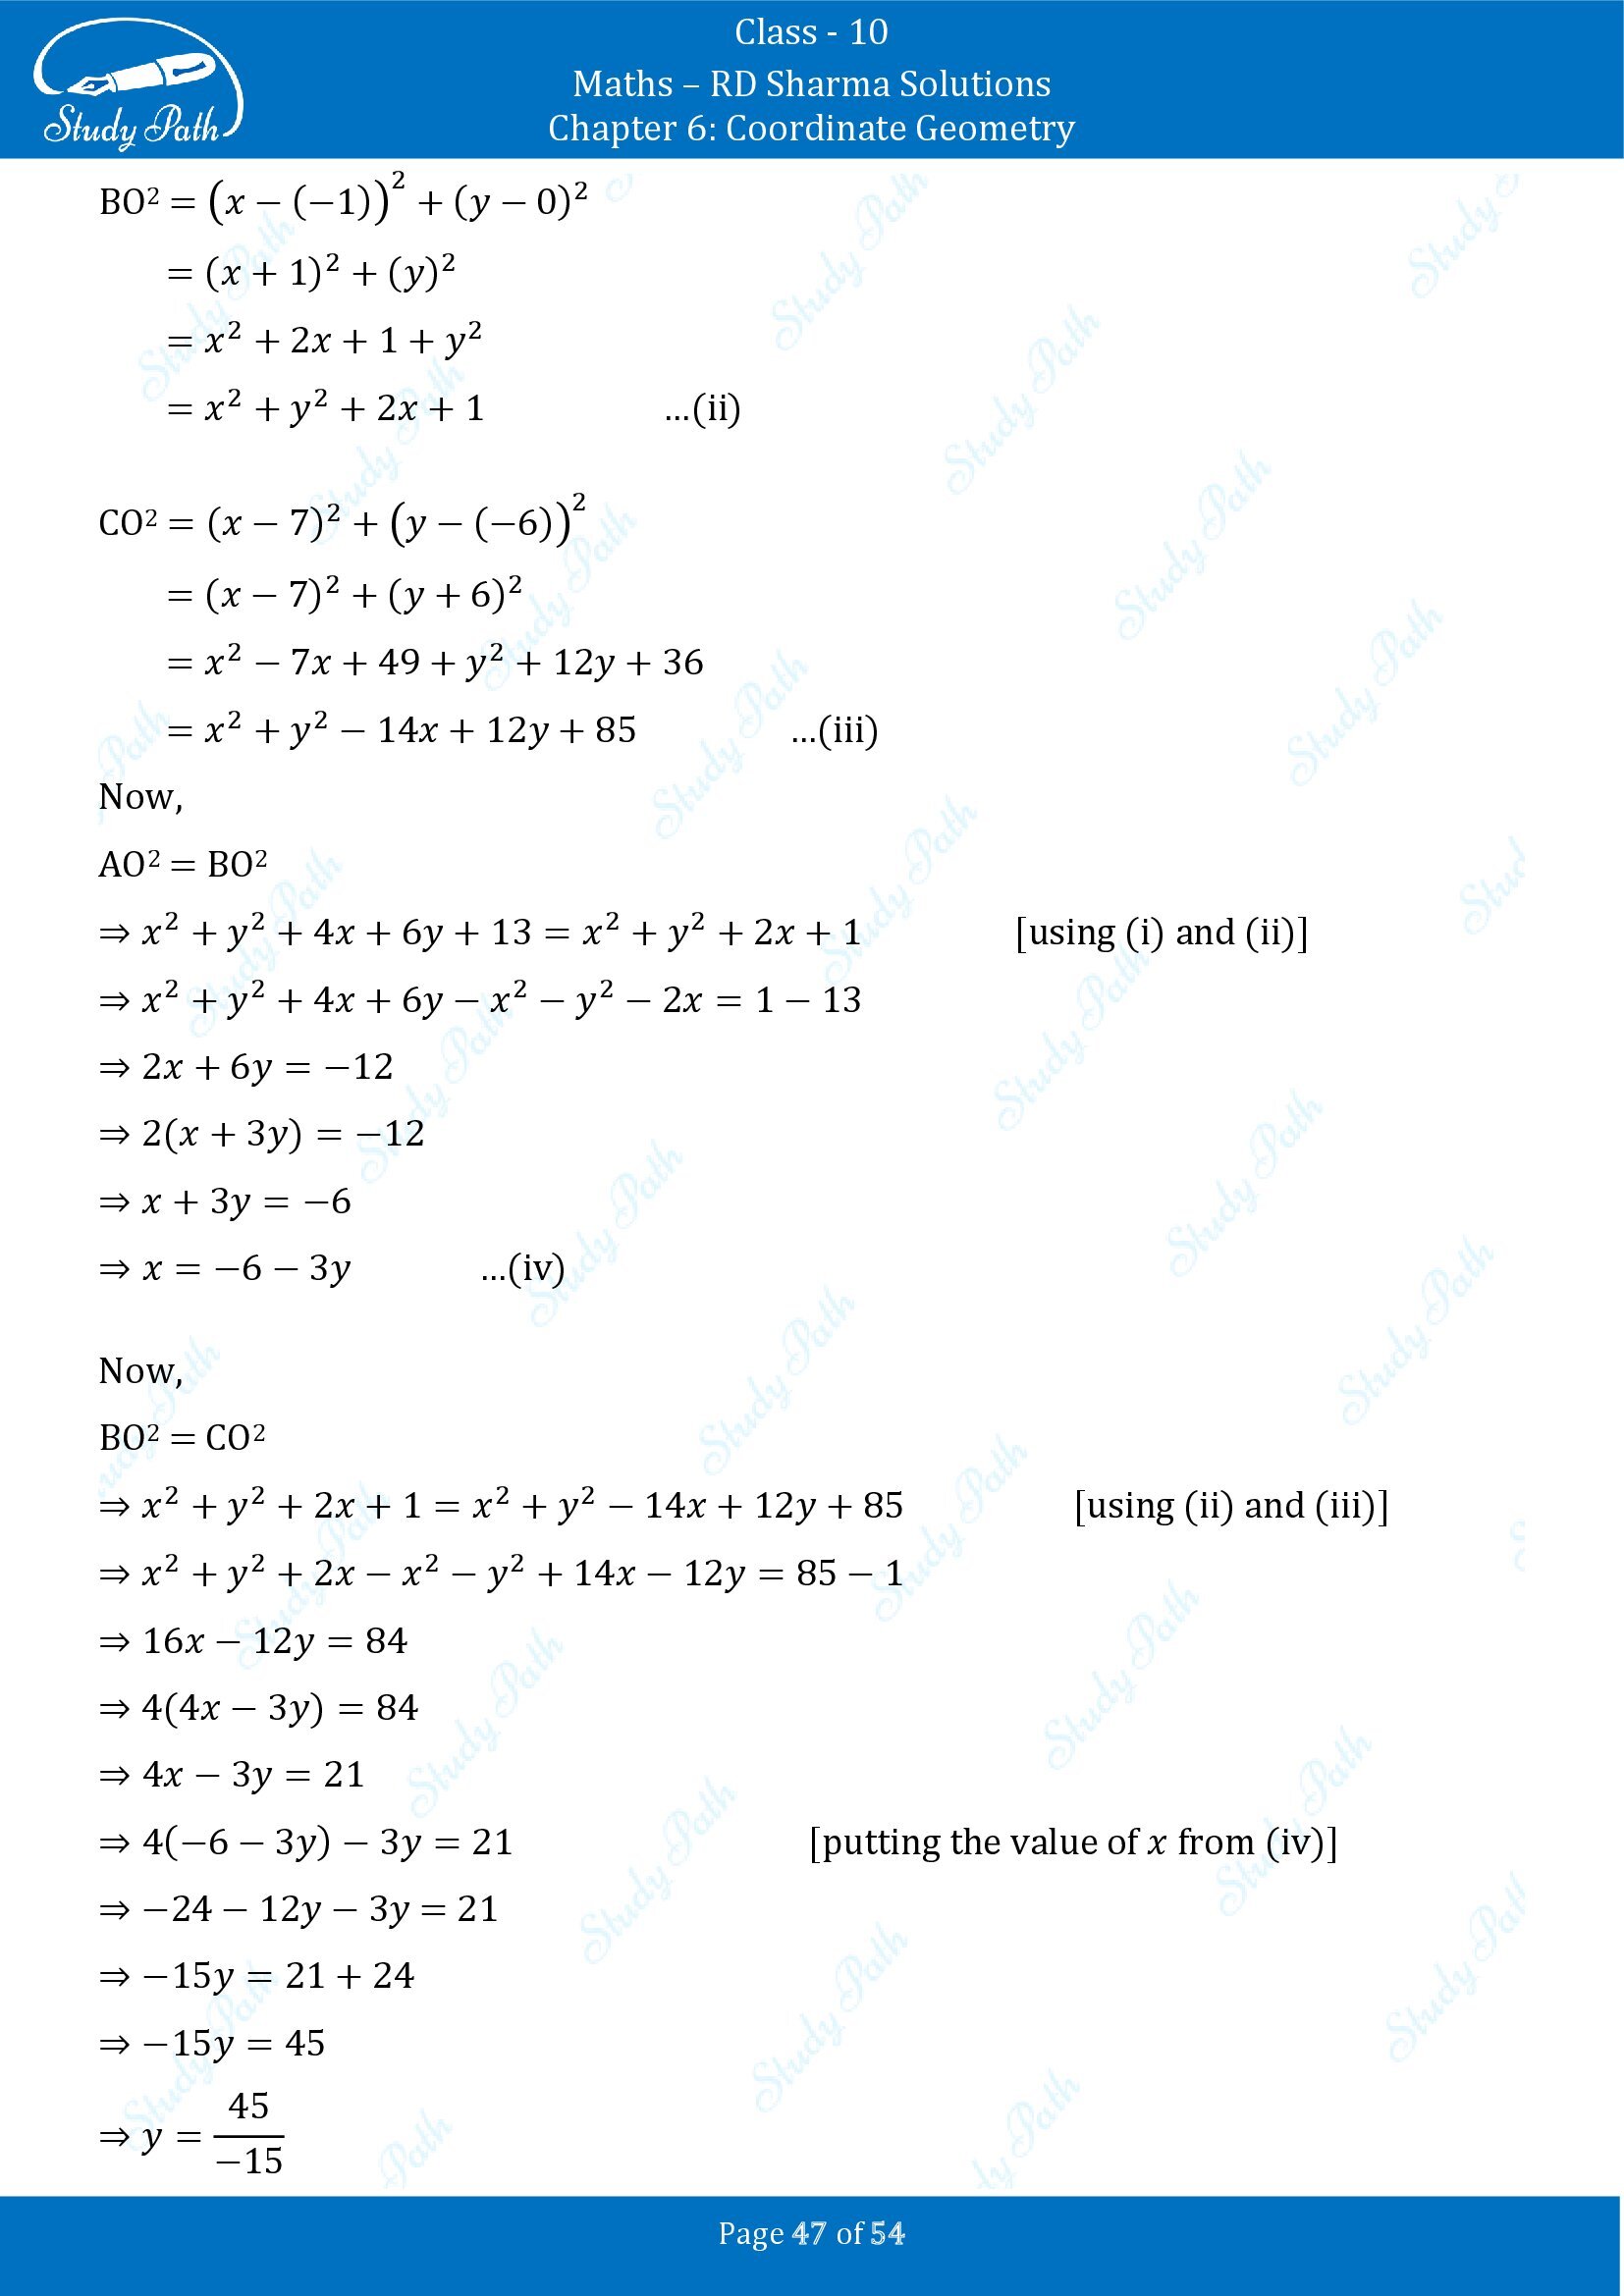 RD Sharma Solutions Class 10 Chapter 6 Coordinate Geometry Exercise 6.2 0047